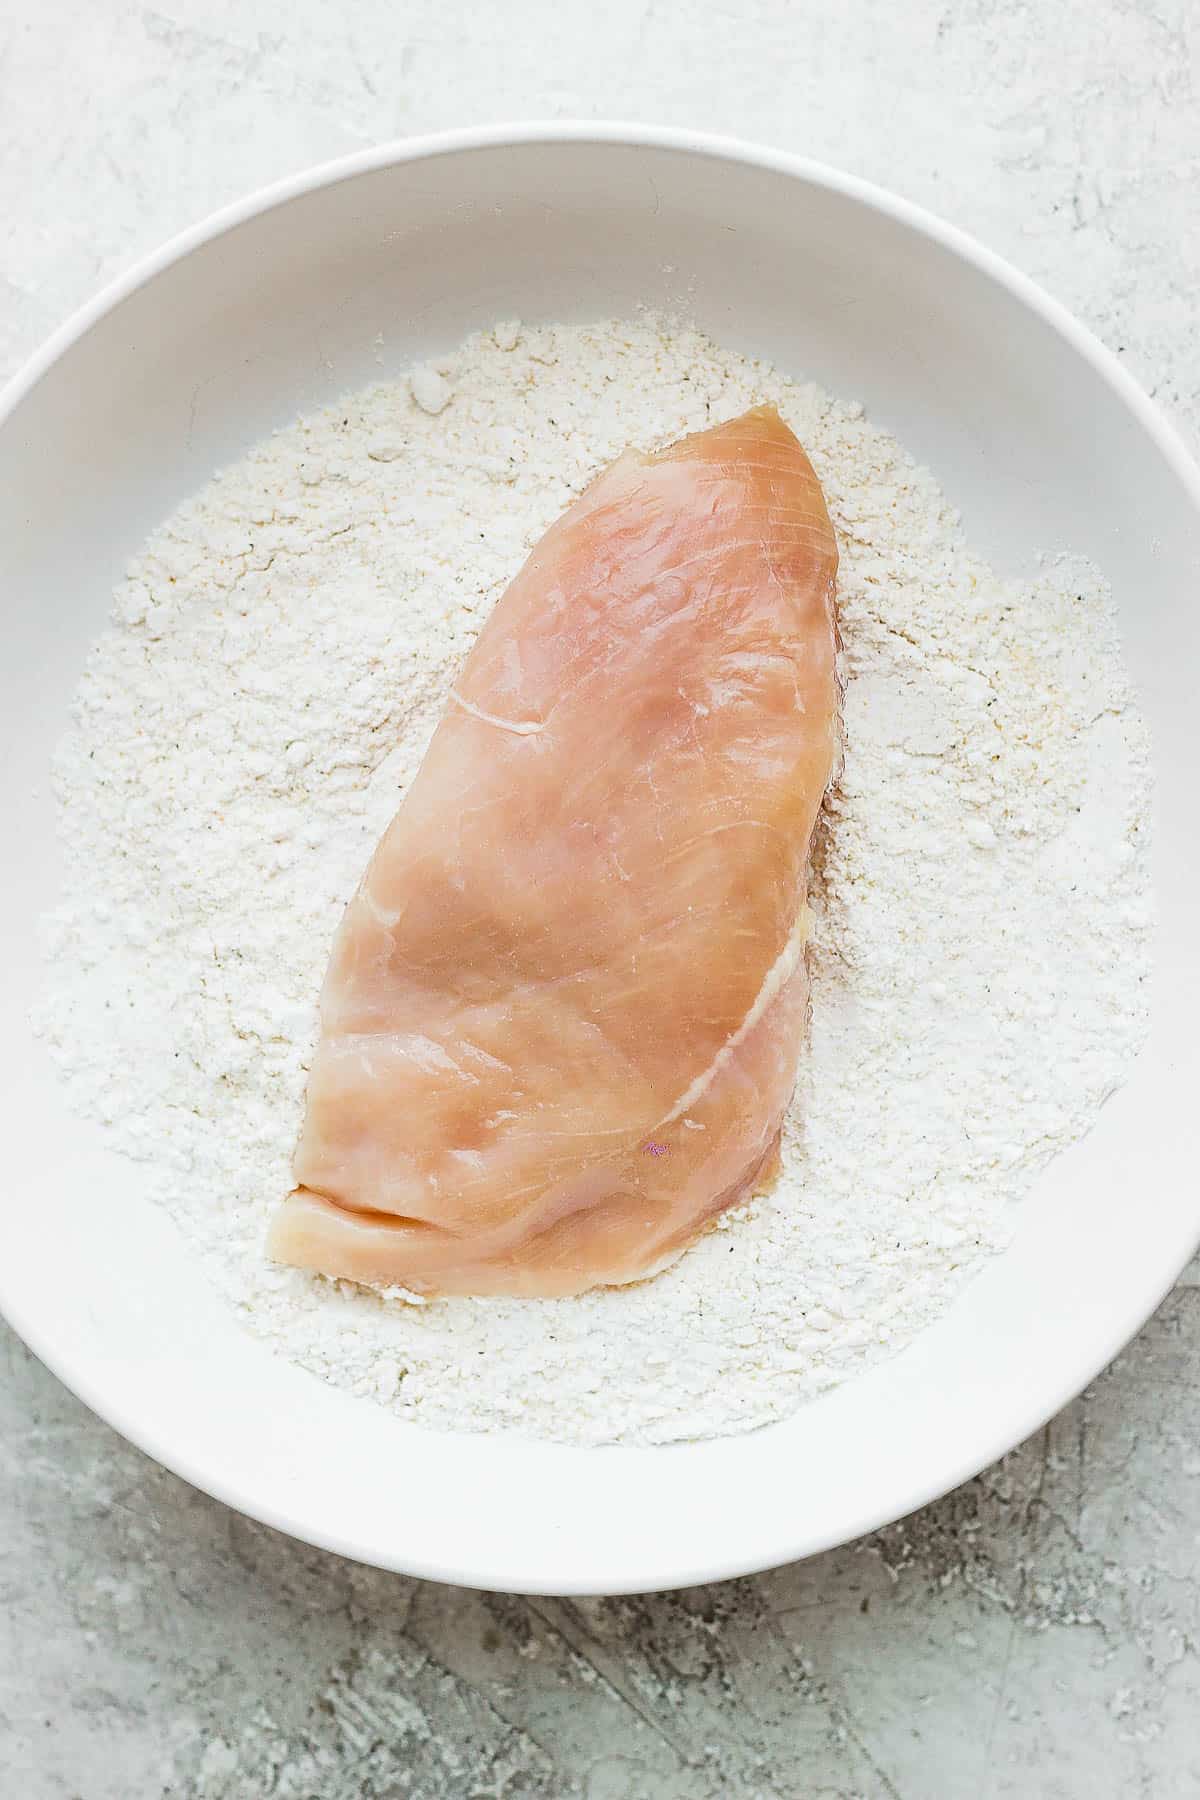 A raw chicken breast in a bowl with flour & seasonings.